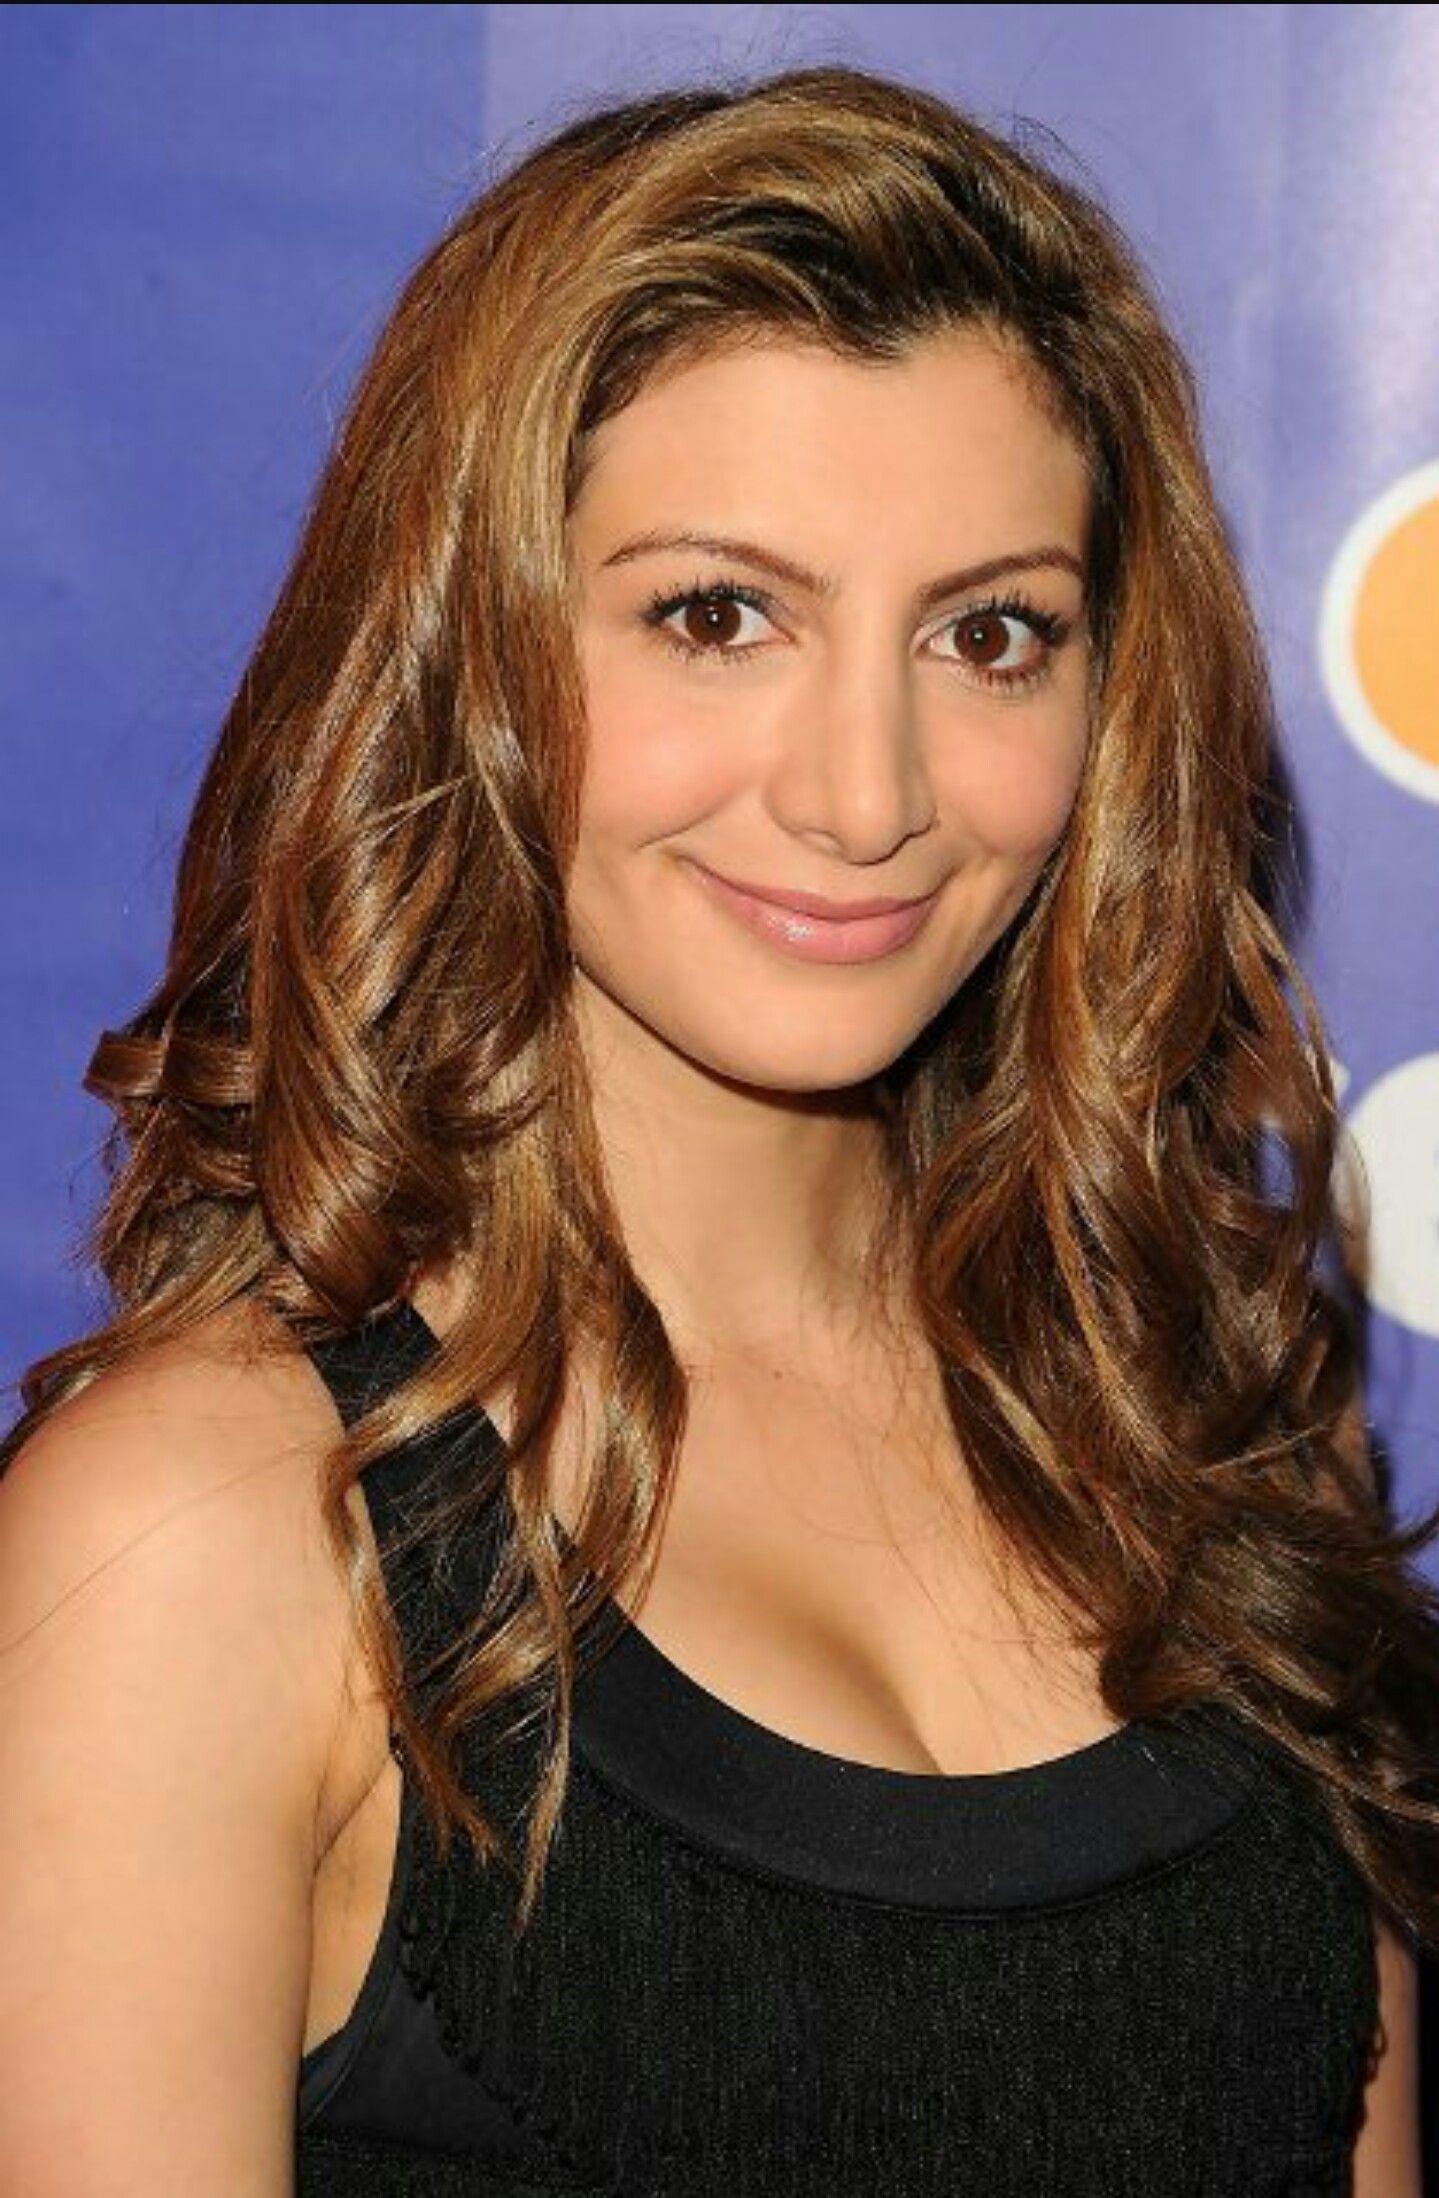 60+ Nasim Pedrad Boobs Pictures Are Simply Excessively Damn Hot 225